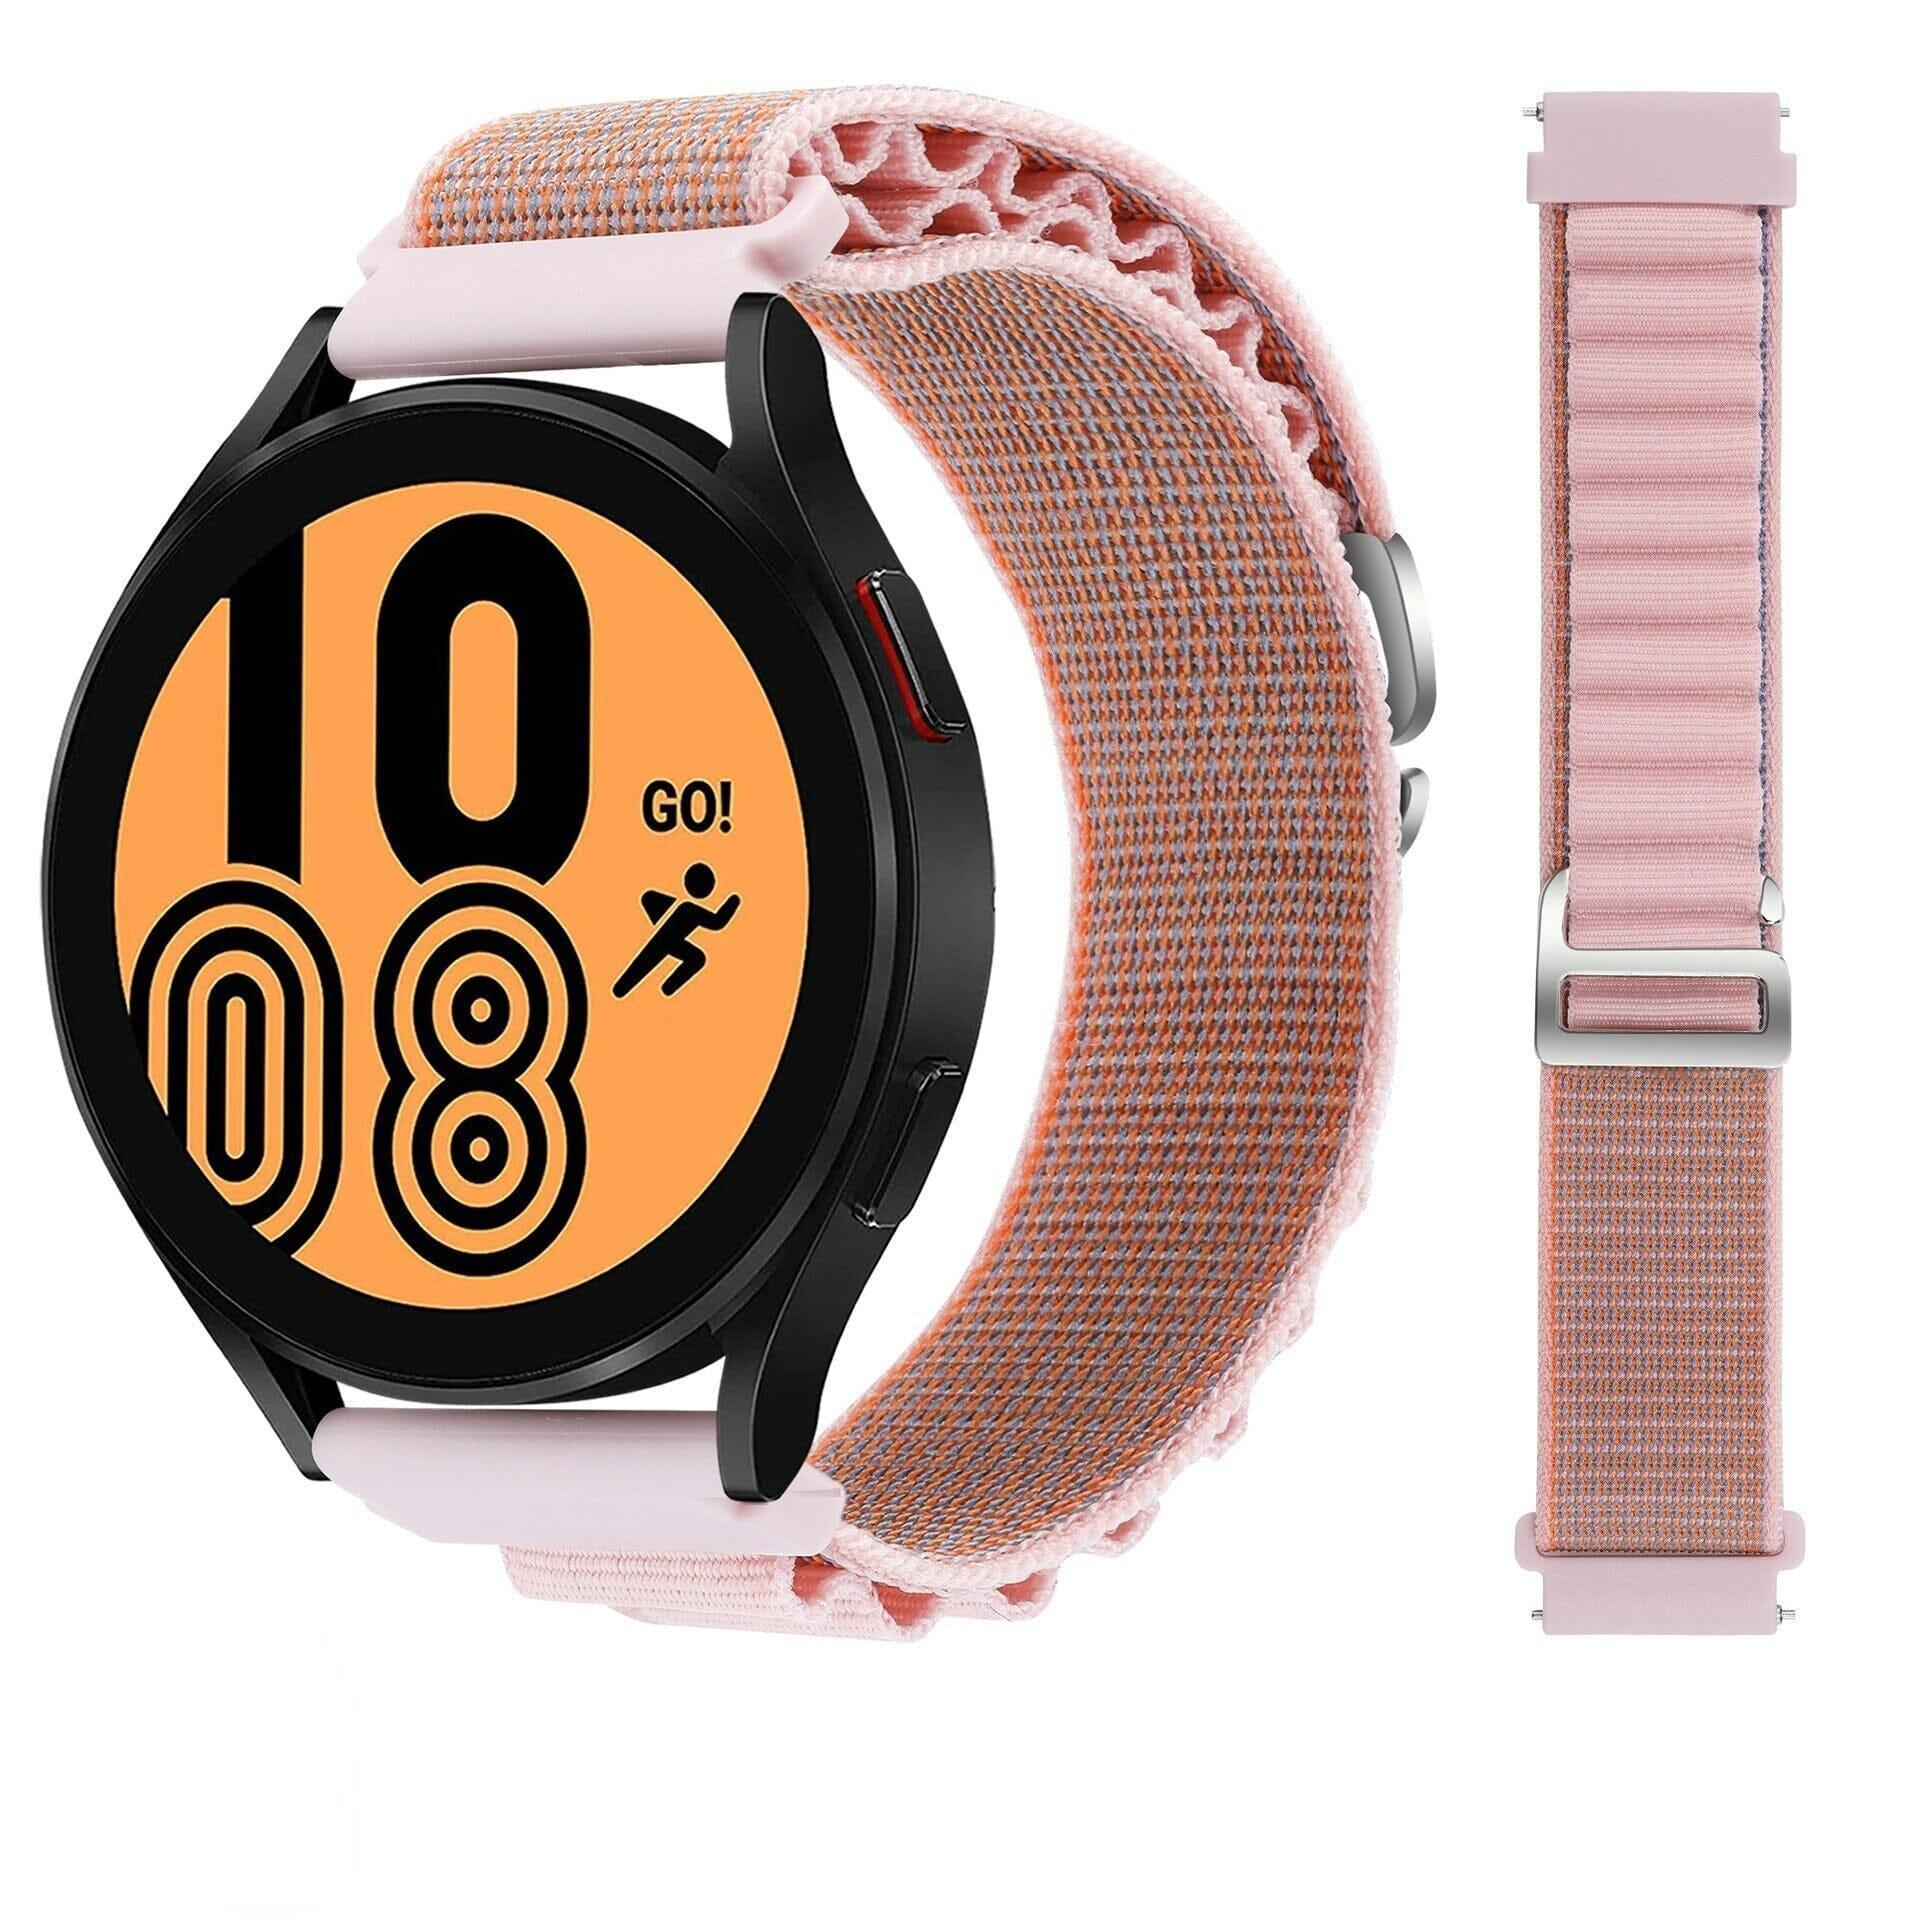 Alpine Loop Watch Straps Compatible with the LG Watch Style